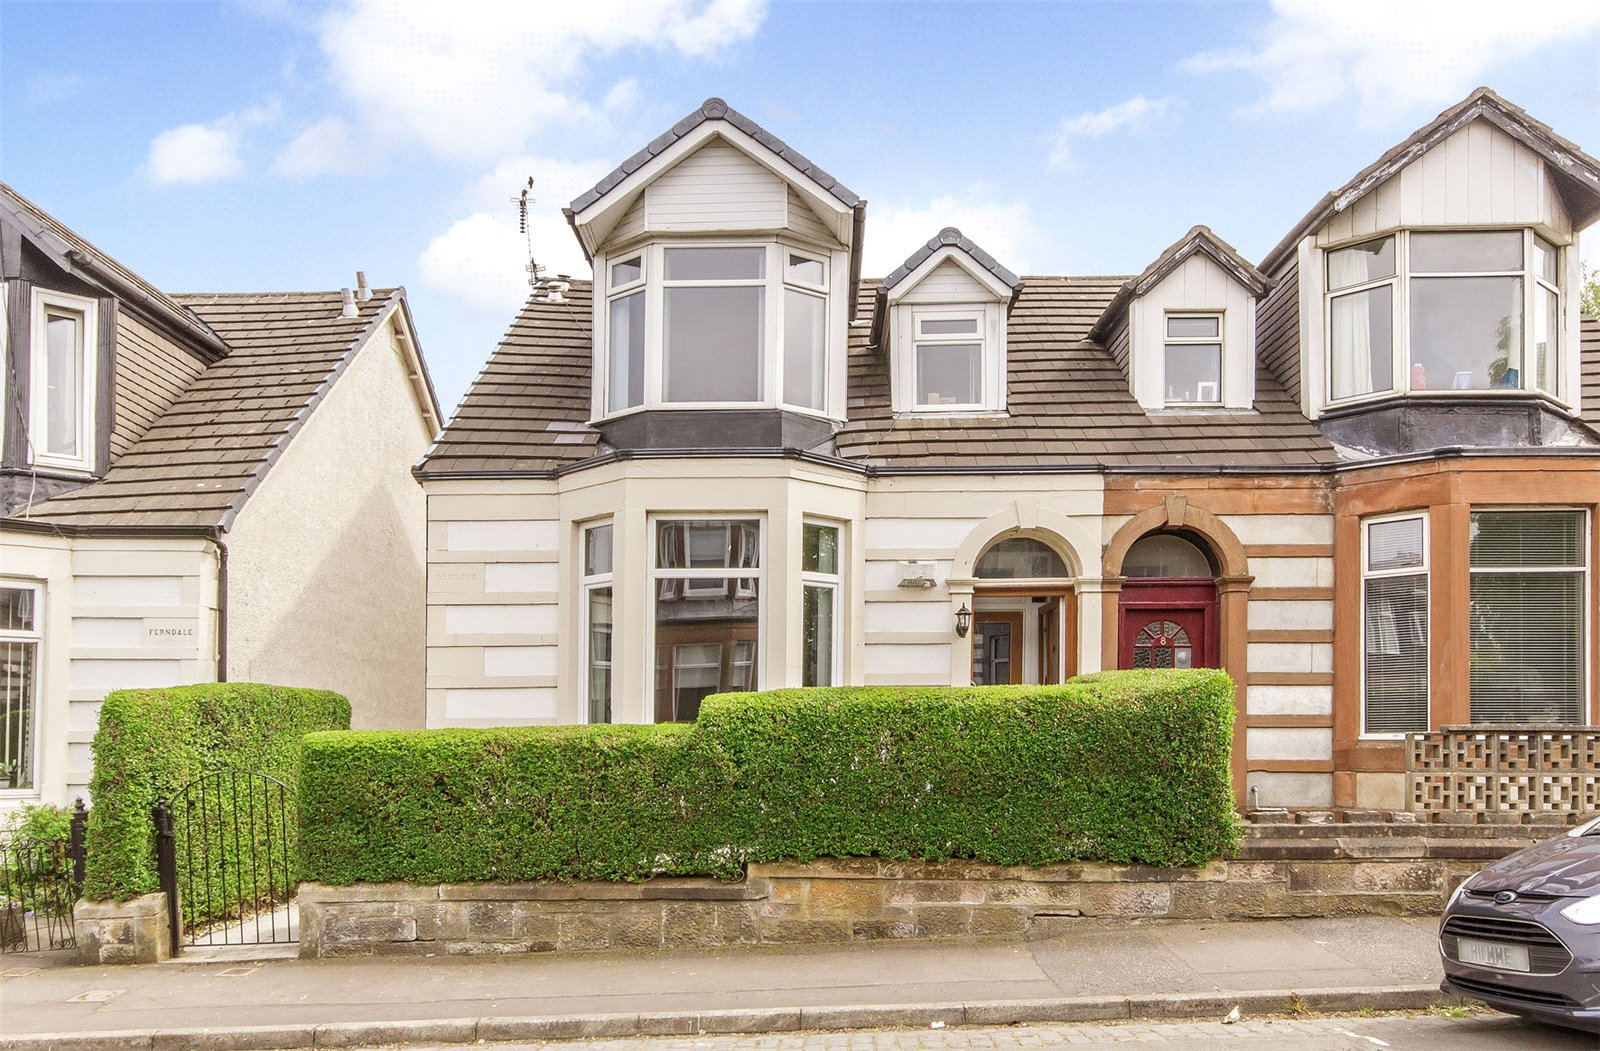 Our latest properties for sale and to let (24th May 2018)